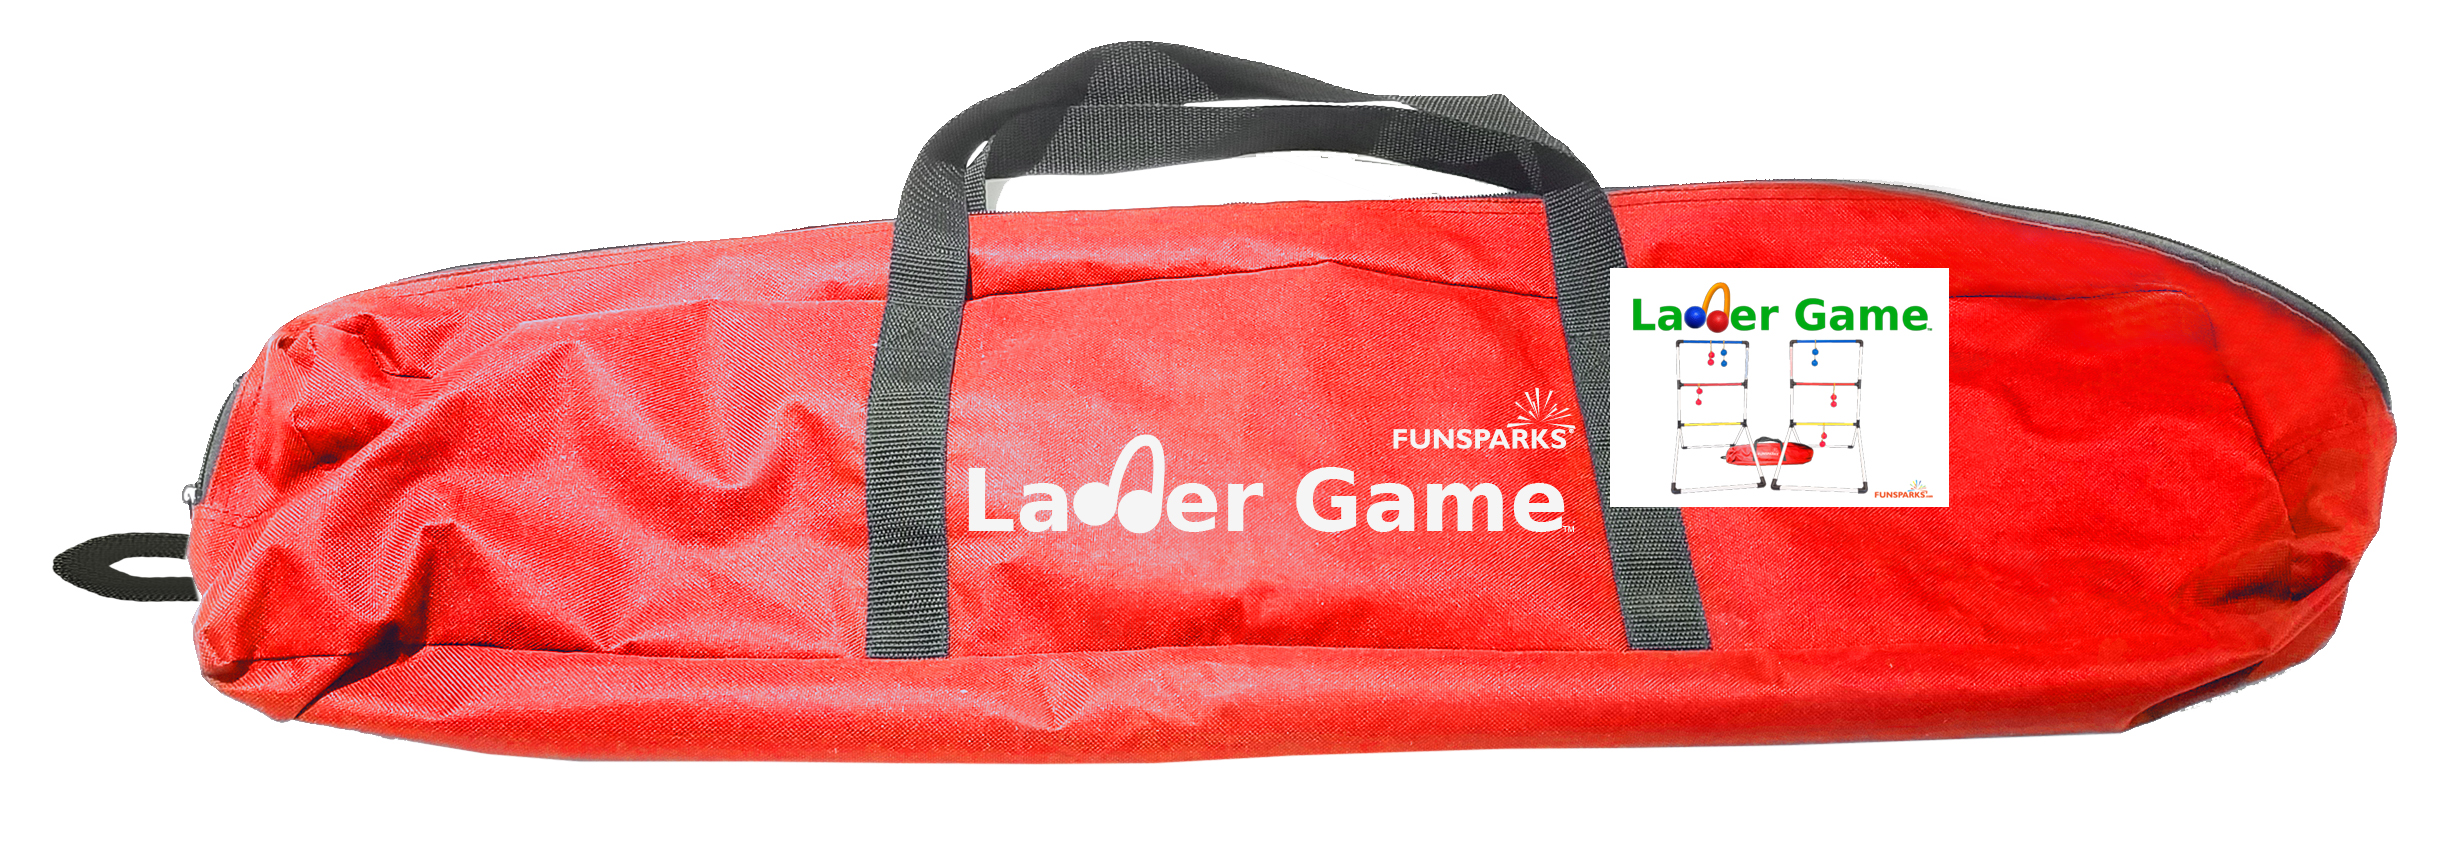 Ladder Game package 